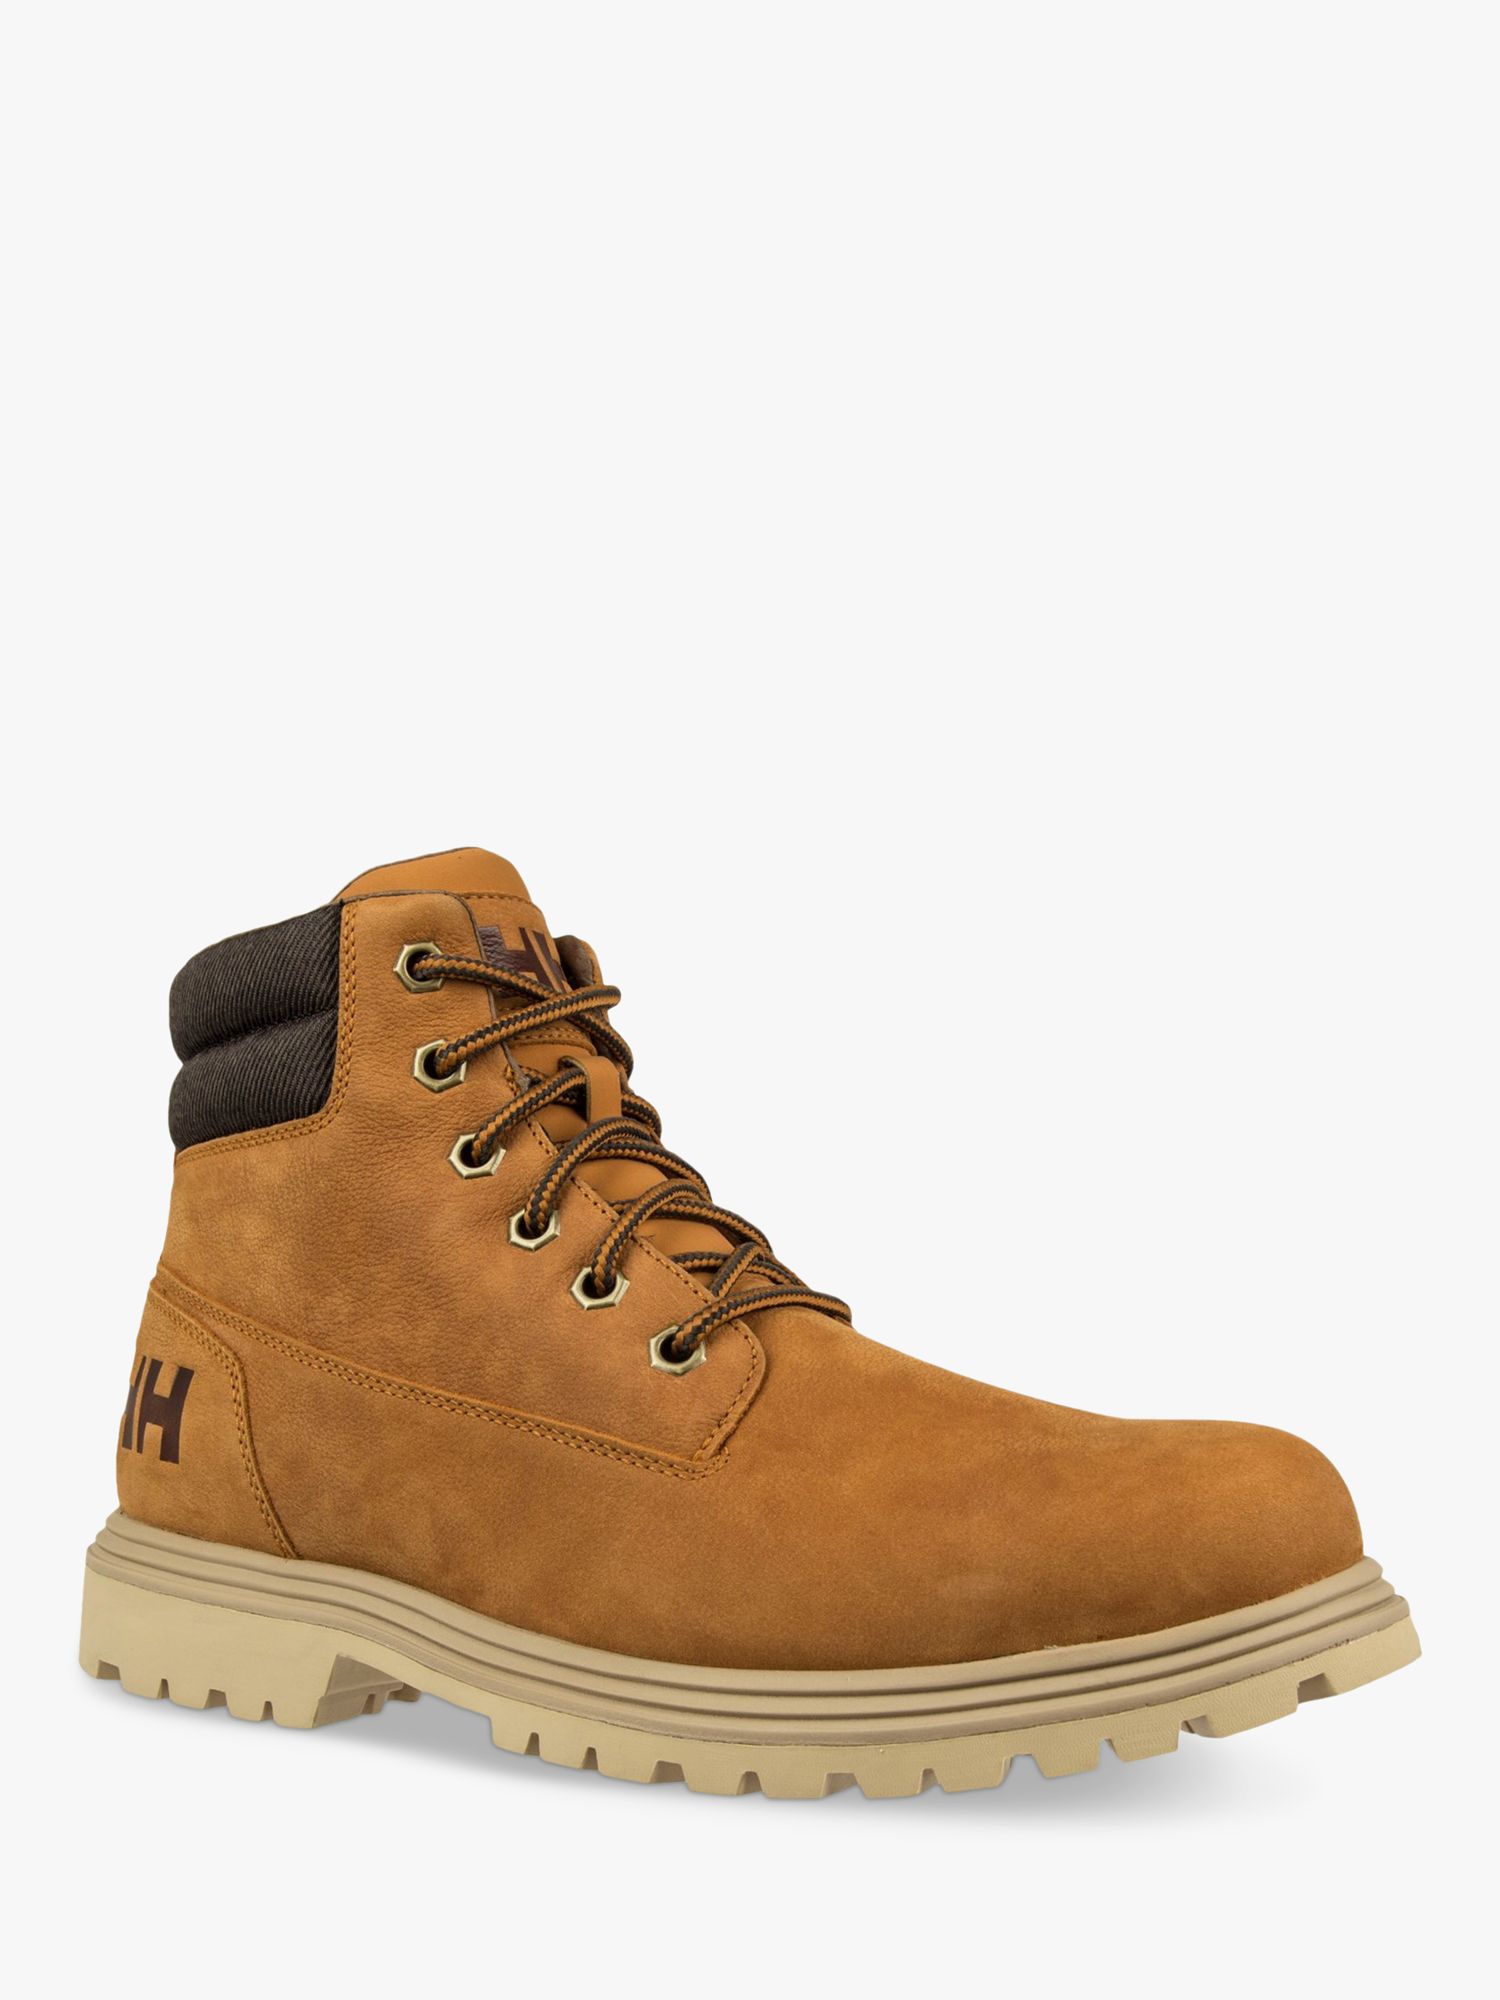 Helly Hansen Fremont Leather Lace Up Ankle Boots, Honey at John Lewis ...